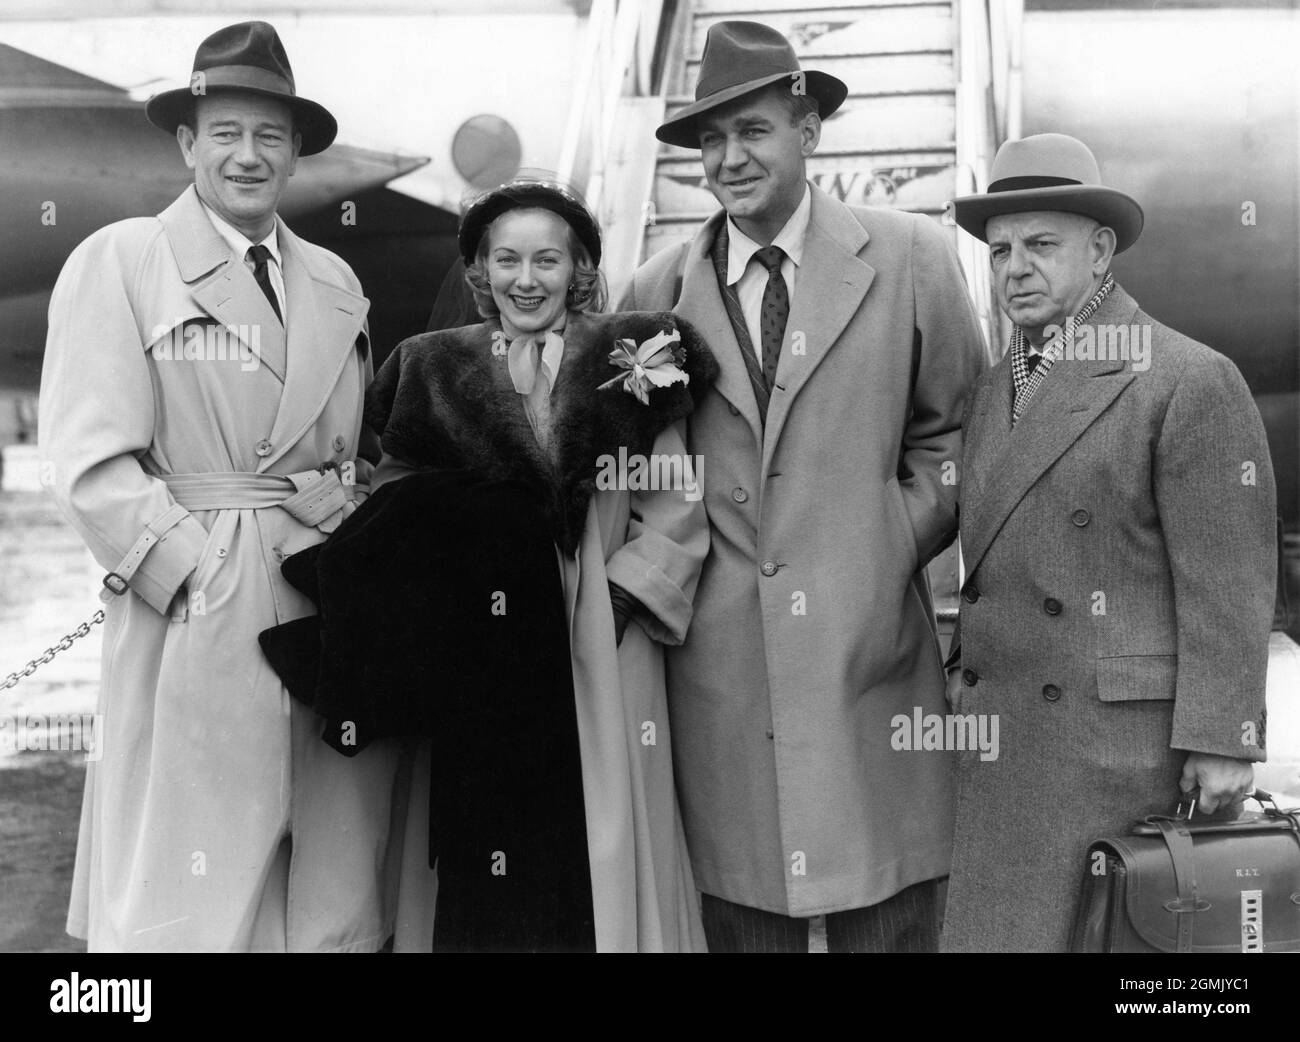 JOHN WAYNE and President of Republic Pictures HERBERT J. YATES (at right) with VERA RALSTON (who married Yates in March 1952) and FORREST TUCKER next to Pan Am Airplane following their arrival in London on Saturday 24th February 1951 to open new premises for Republic Pictures in Soho Square on the following Monday and attend the premiere of their latest film RIO GRANDE on Friday 2nd March at the Carlton Theatre publicity for Pan American World Airways Stock Photo